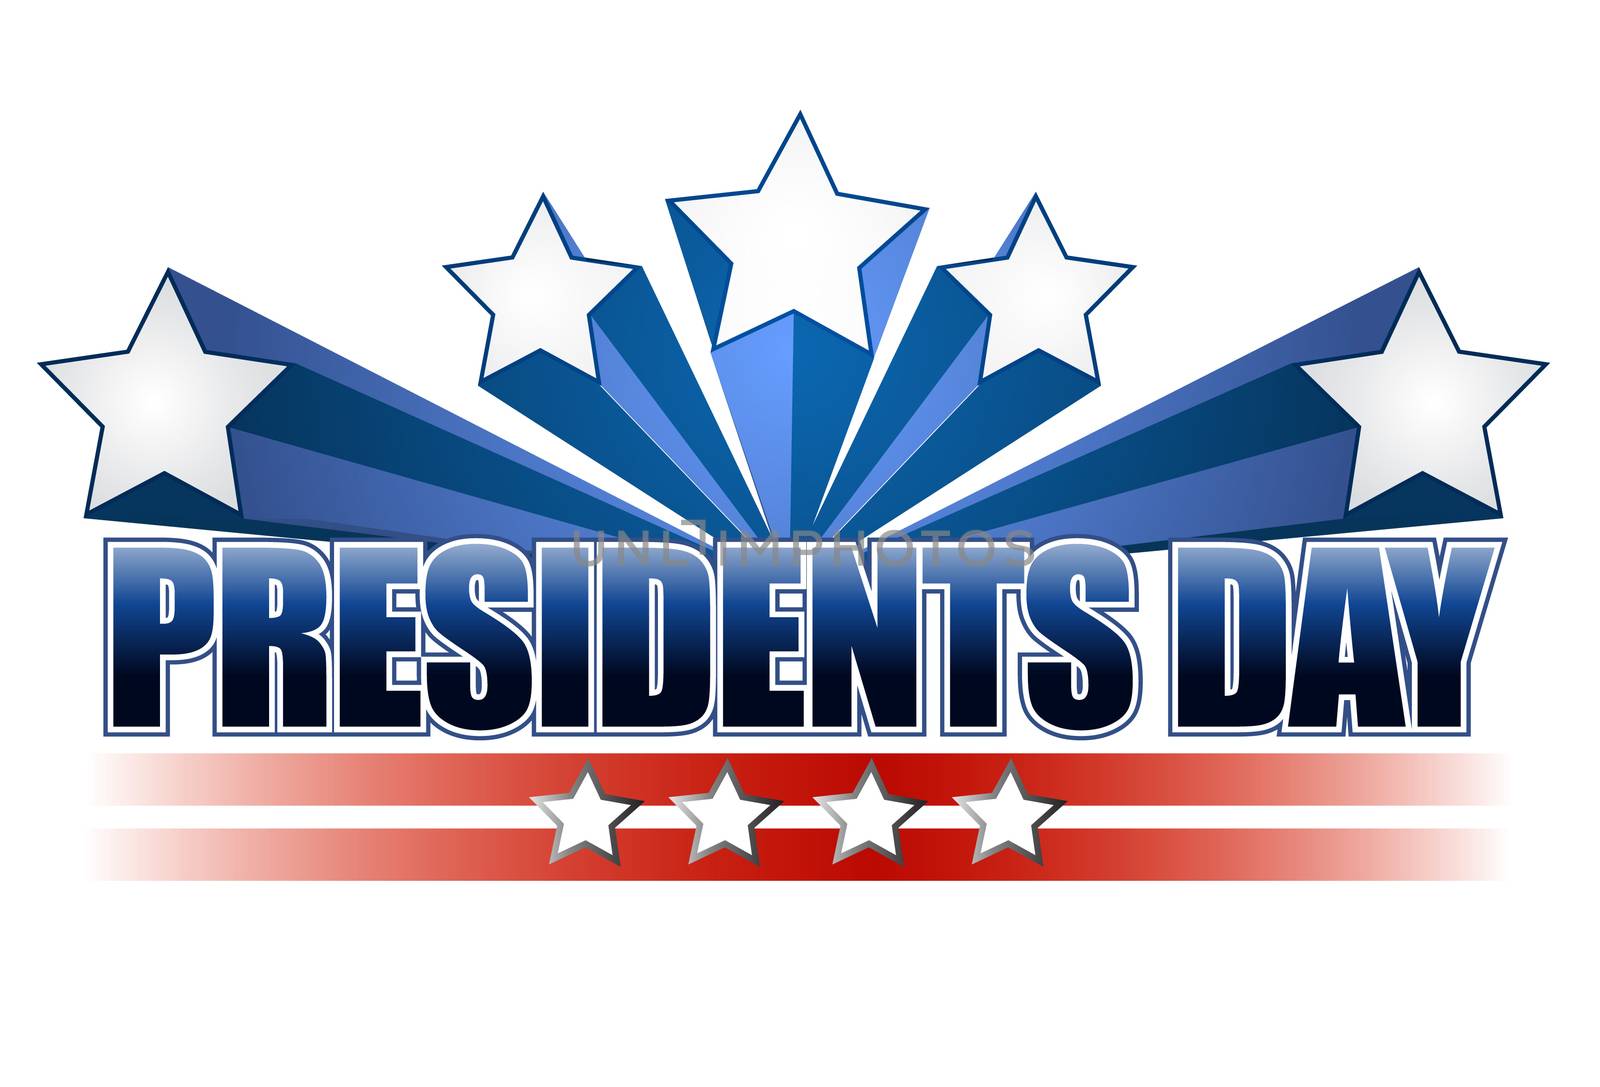 presidents day sign isolated over a white background.